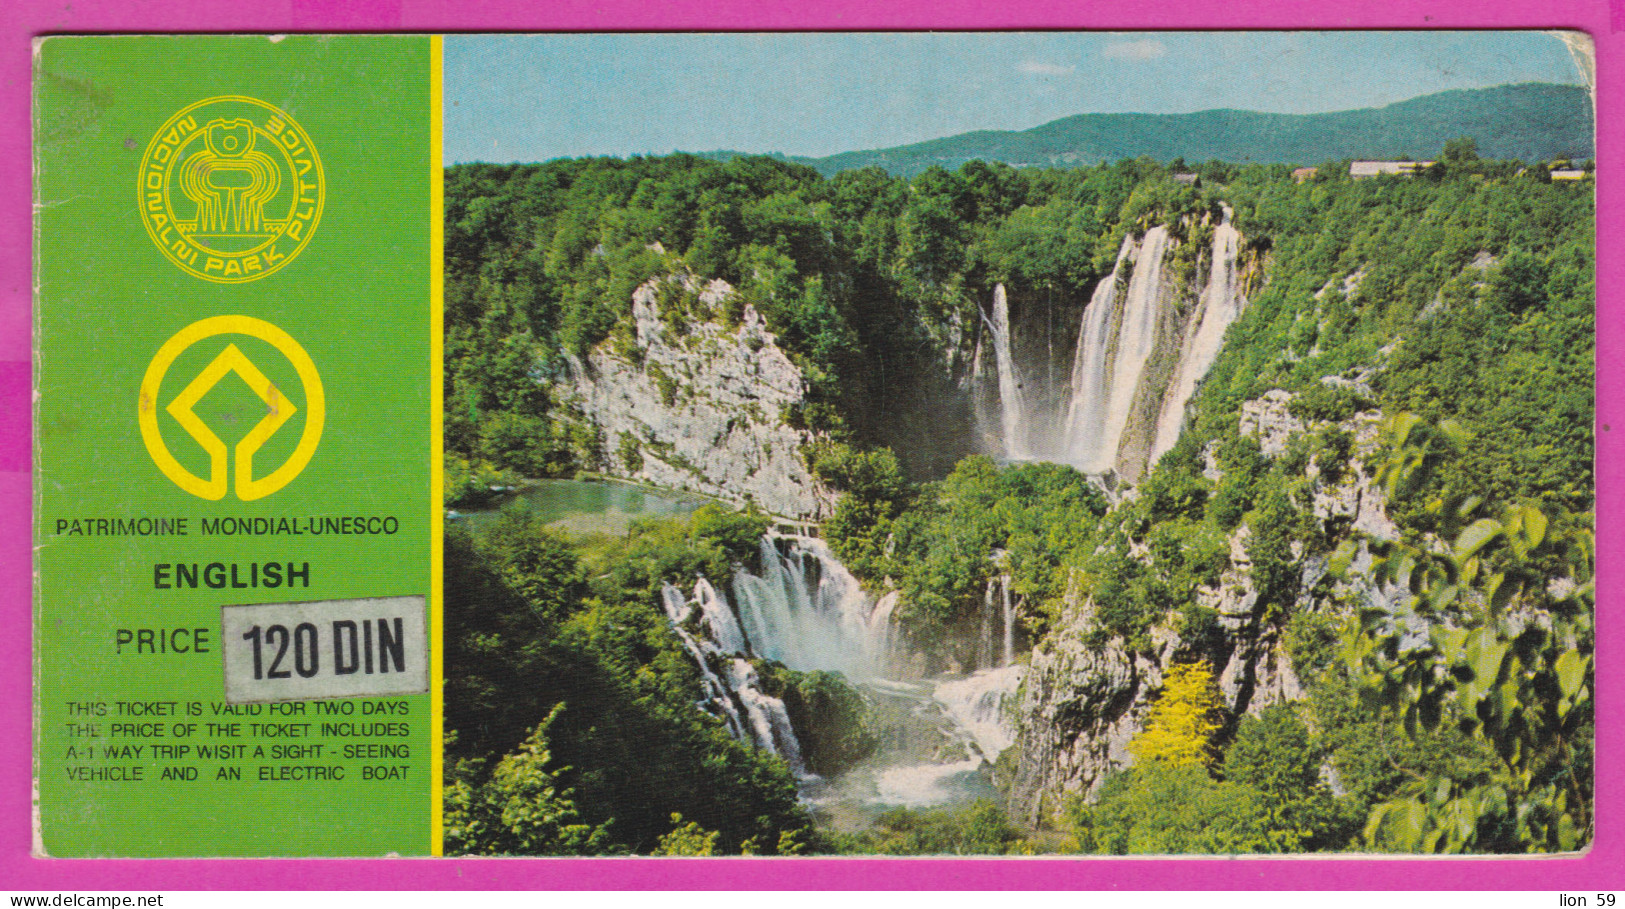 291881 / Croatia Plitvice Lakes Nat Park Price Ticket Includes A-1 Way Trip With A Sight Seeing Vehicle An Electric Boat - Europa